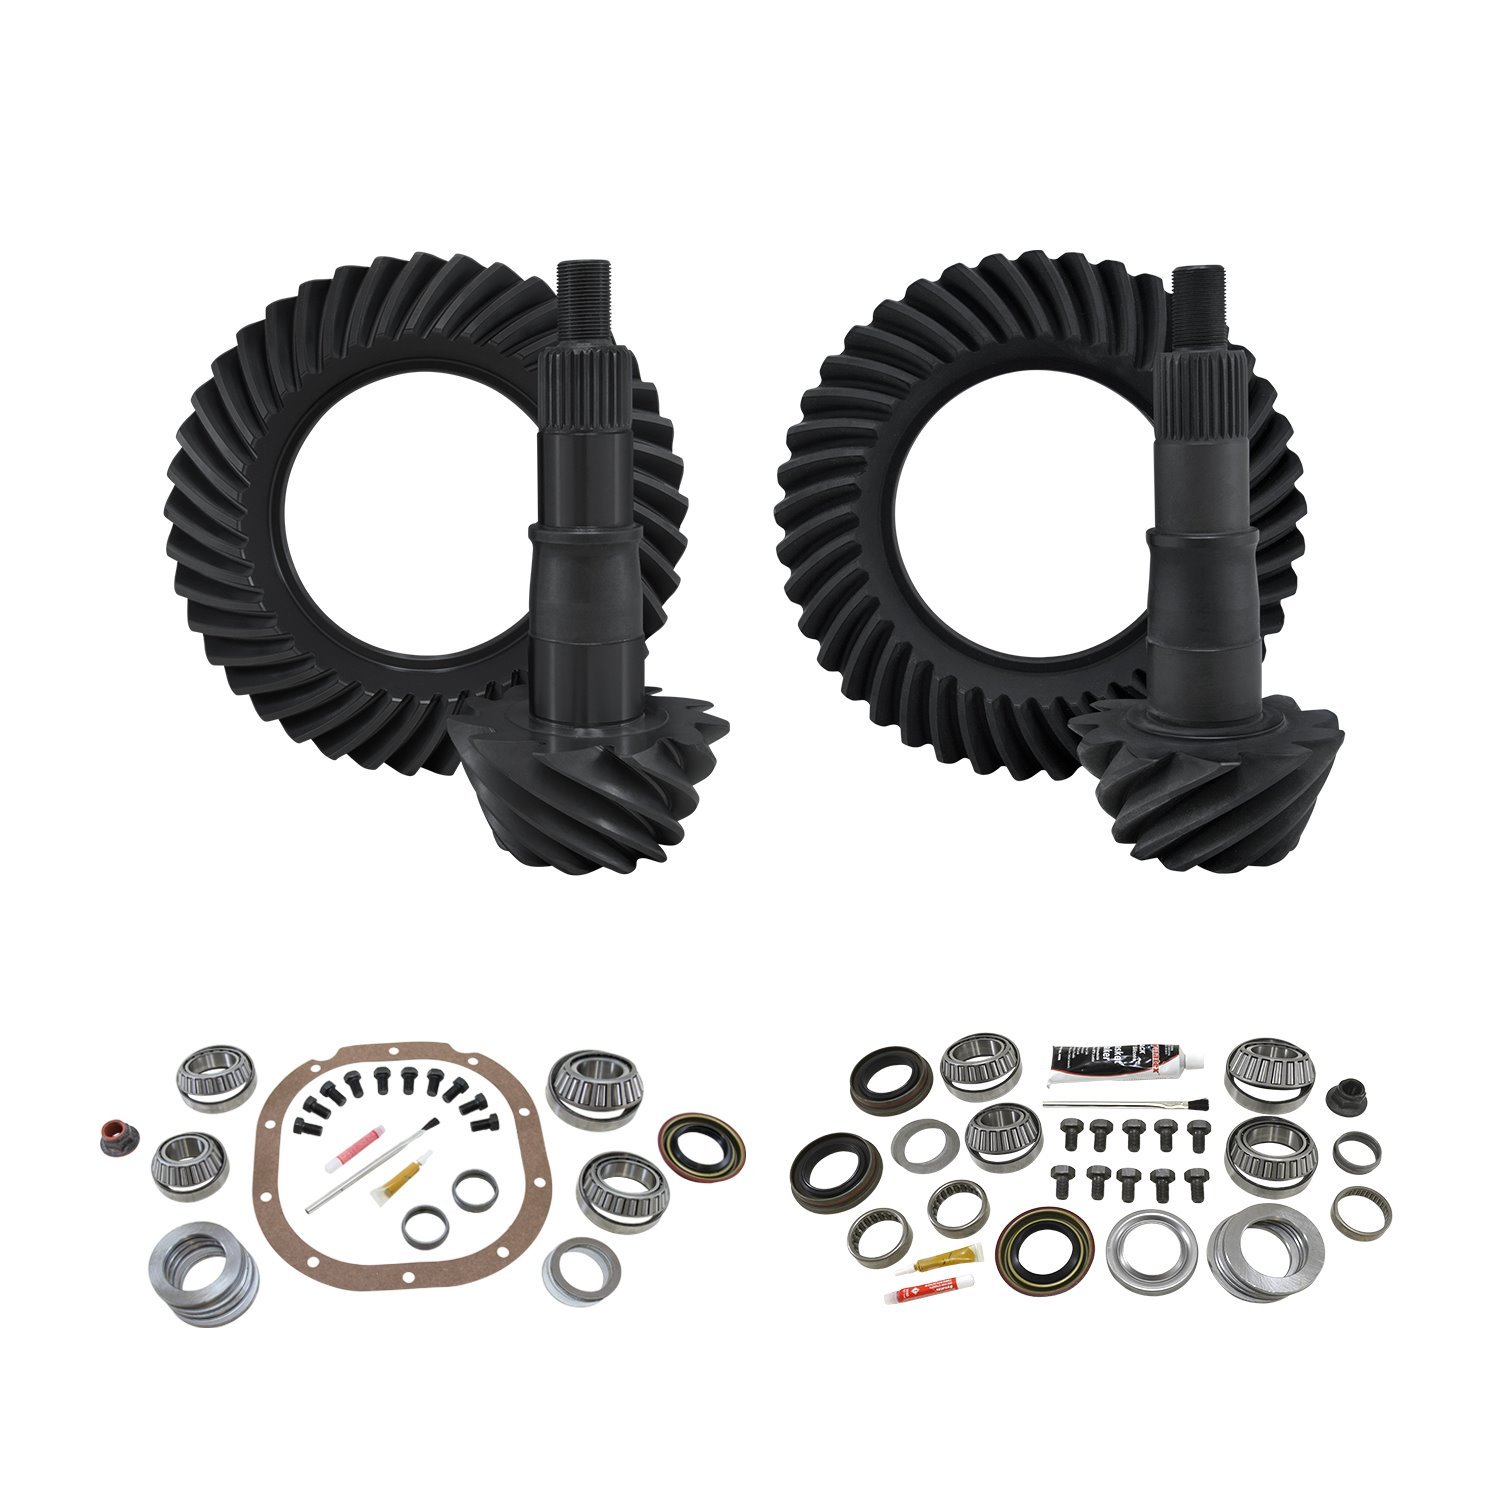 Re-Gear & Installation Kit, Ford 8.8 in., Various F150, 4.56 Ratio, Fr&Rr